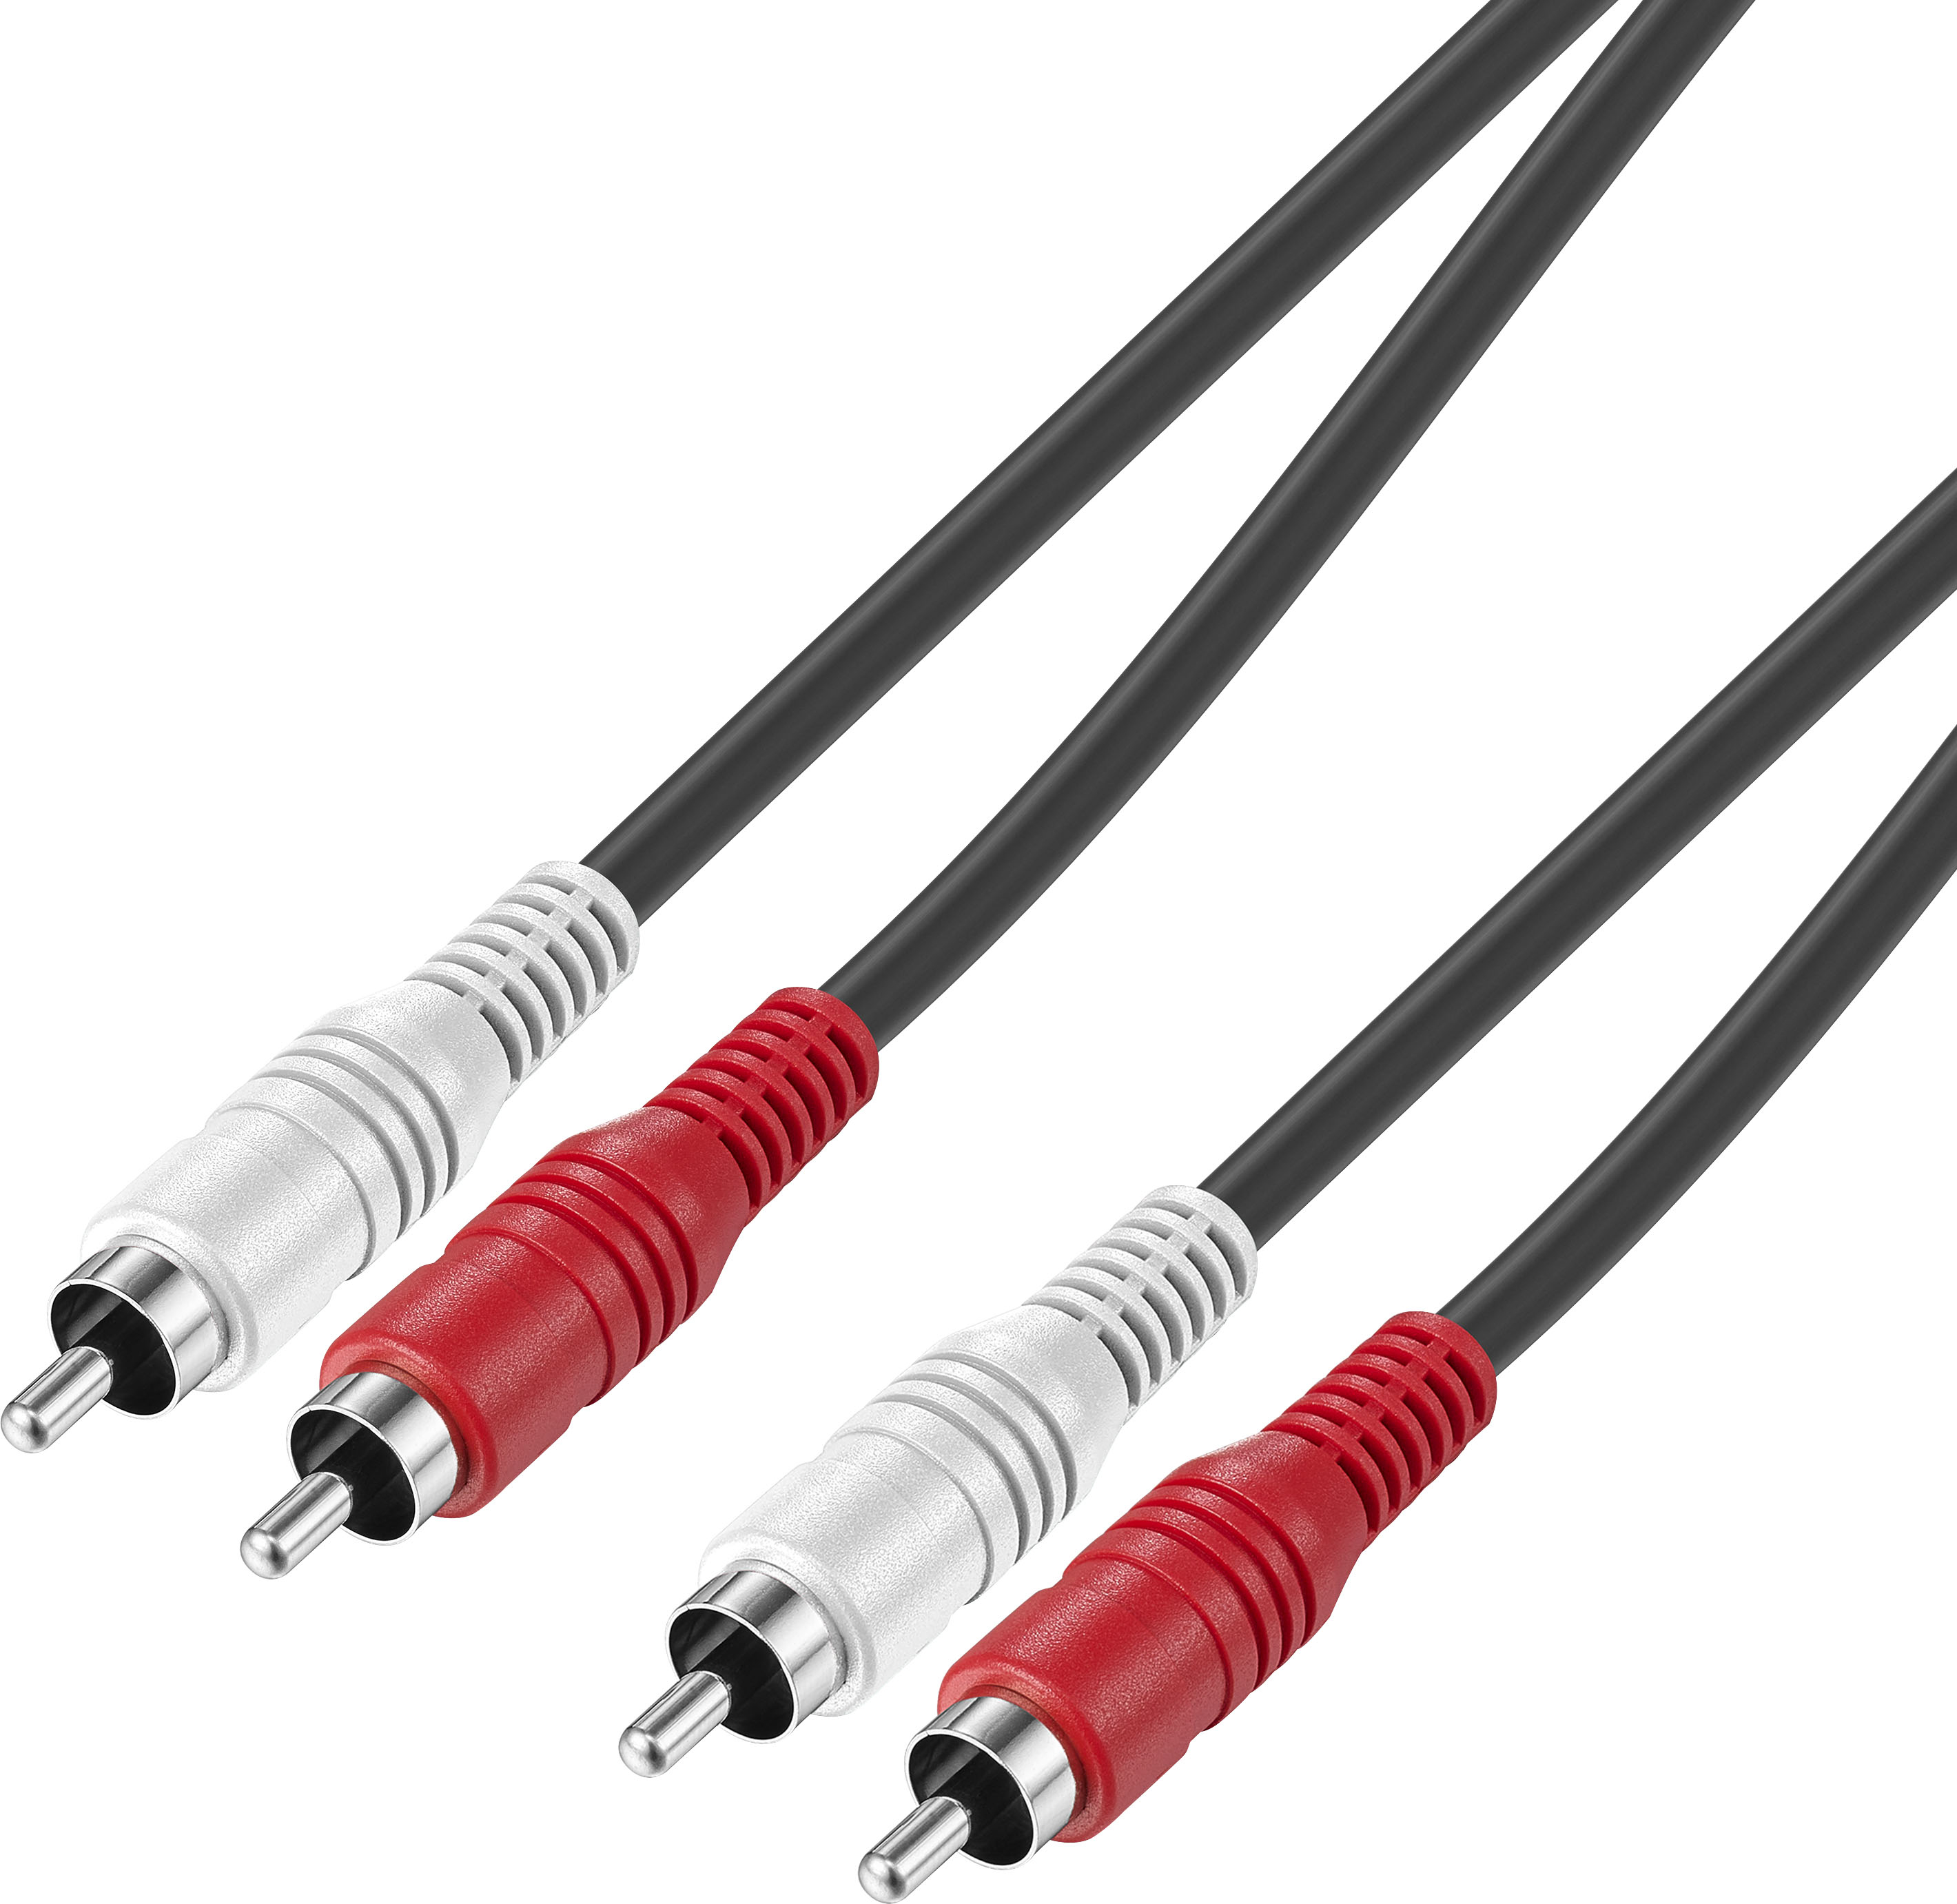 Horror Obligatorio Cuervo Best Buy essentials™ 12' Stereo Audio RCA Cable Black BE-HCL323 - Best Buy